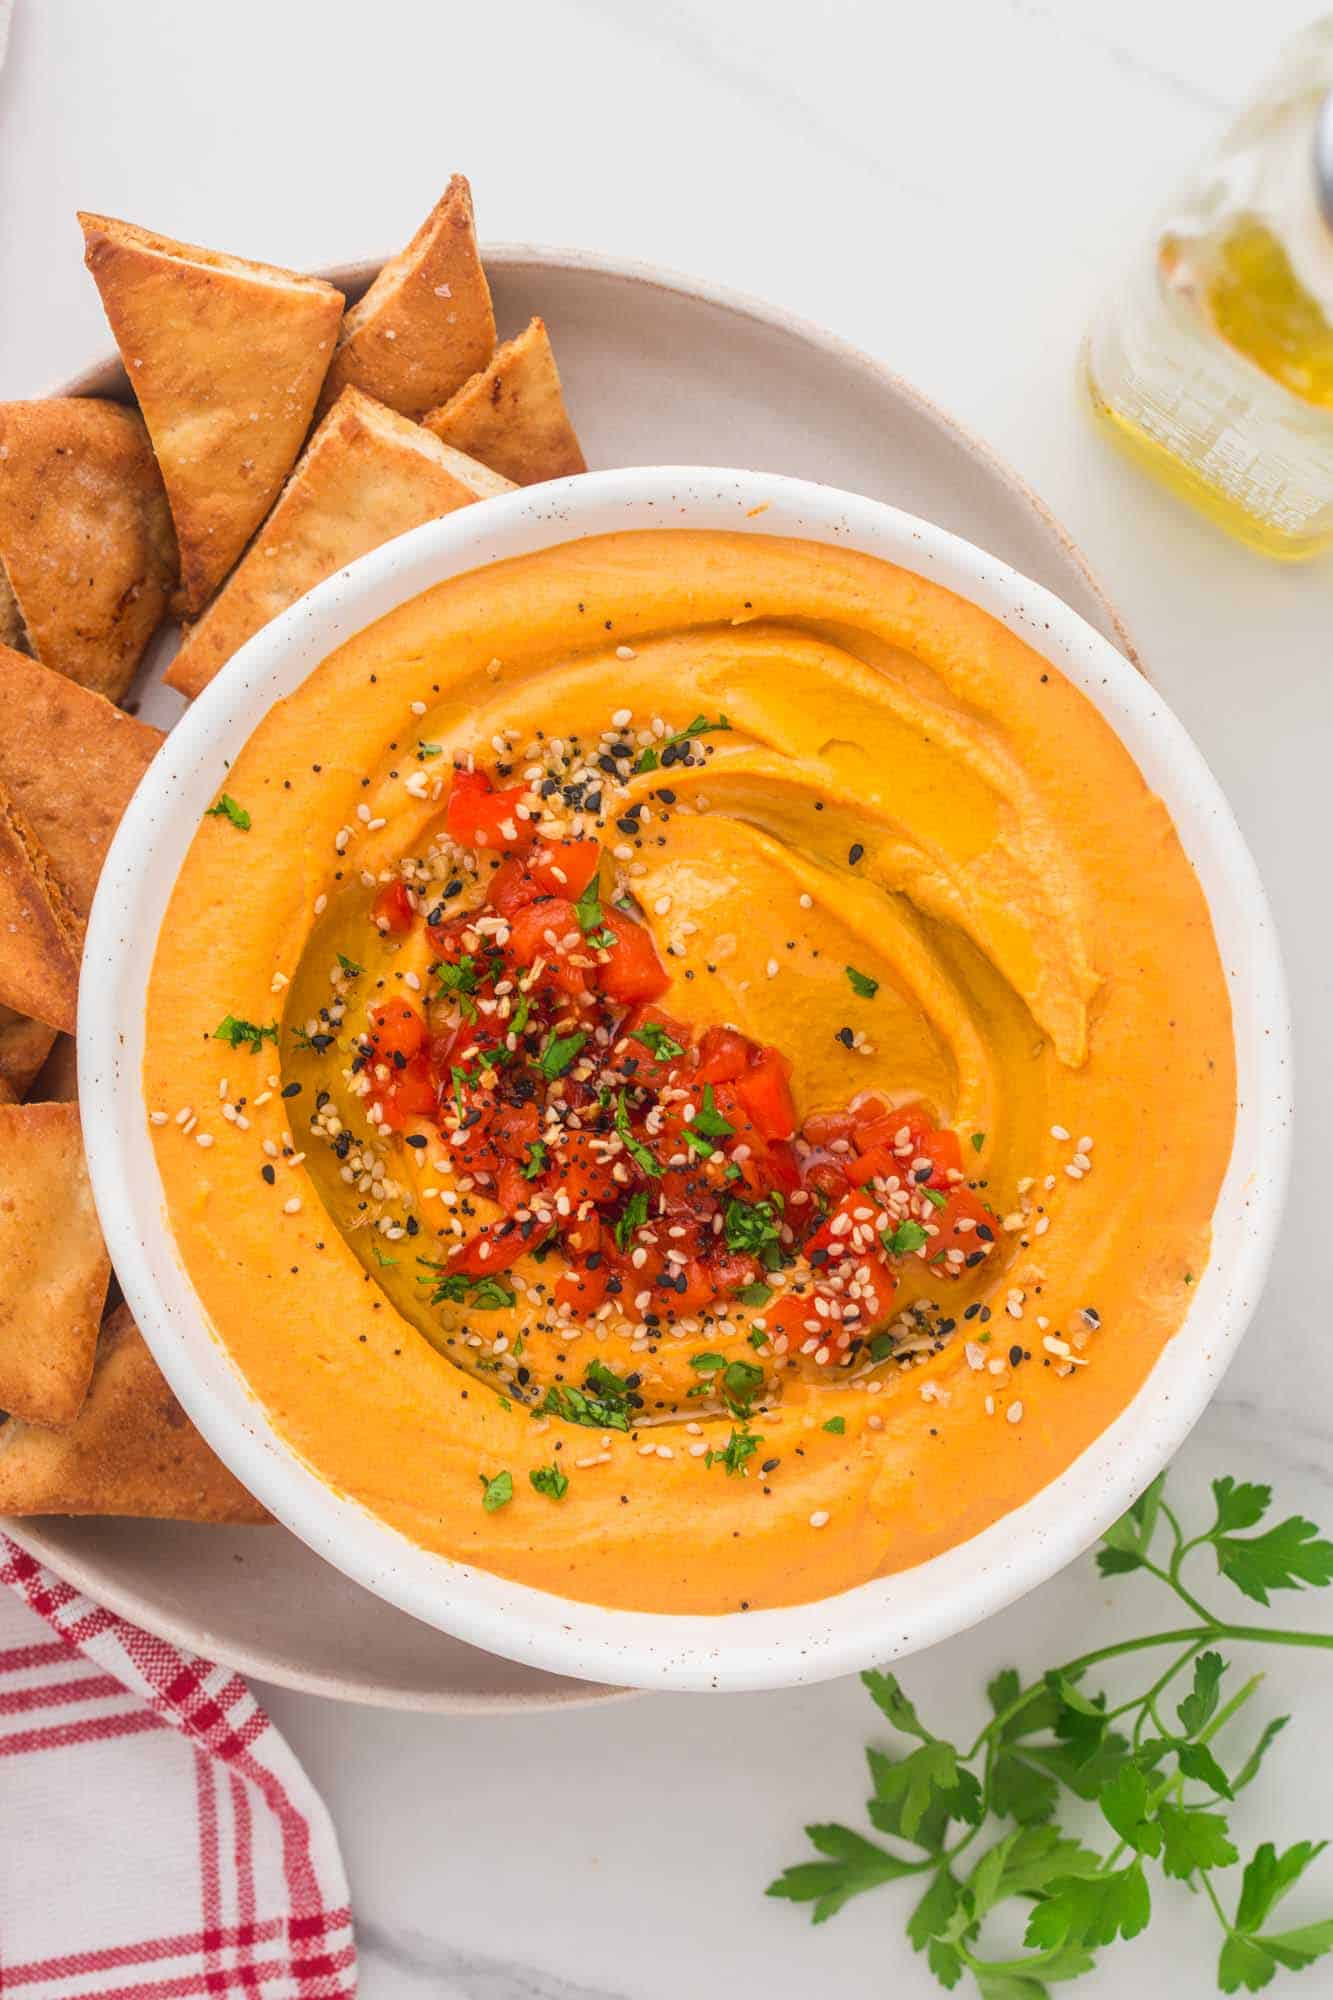 Overhead shot of Roasted Red Pepper Hummus in a white bowl, served with pita chips on the side.